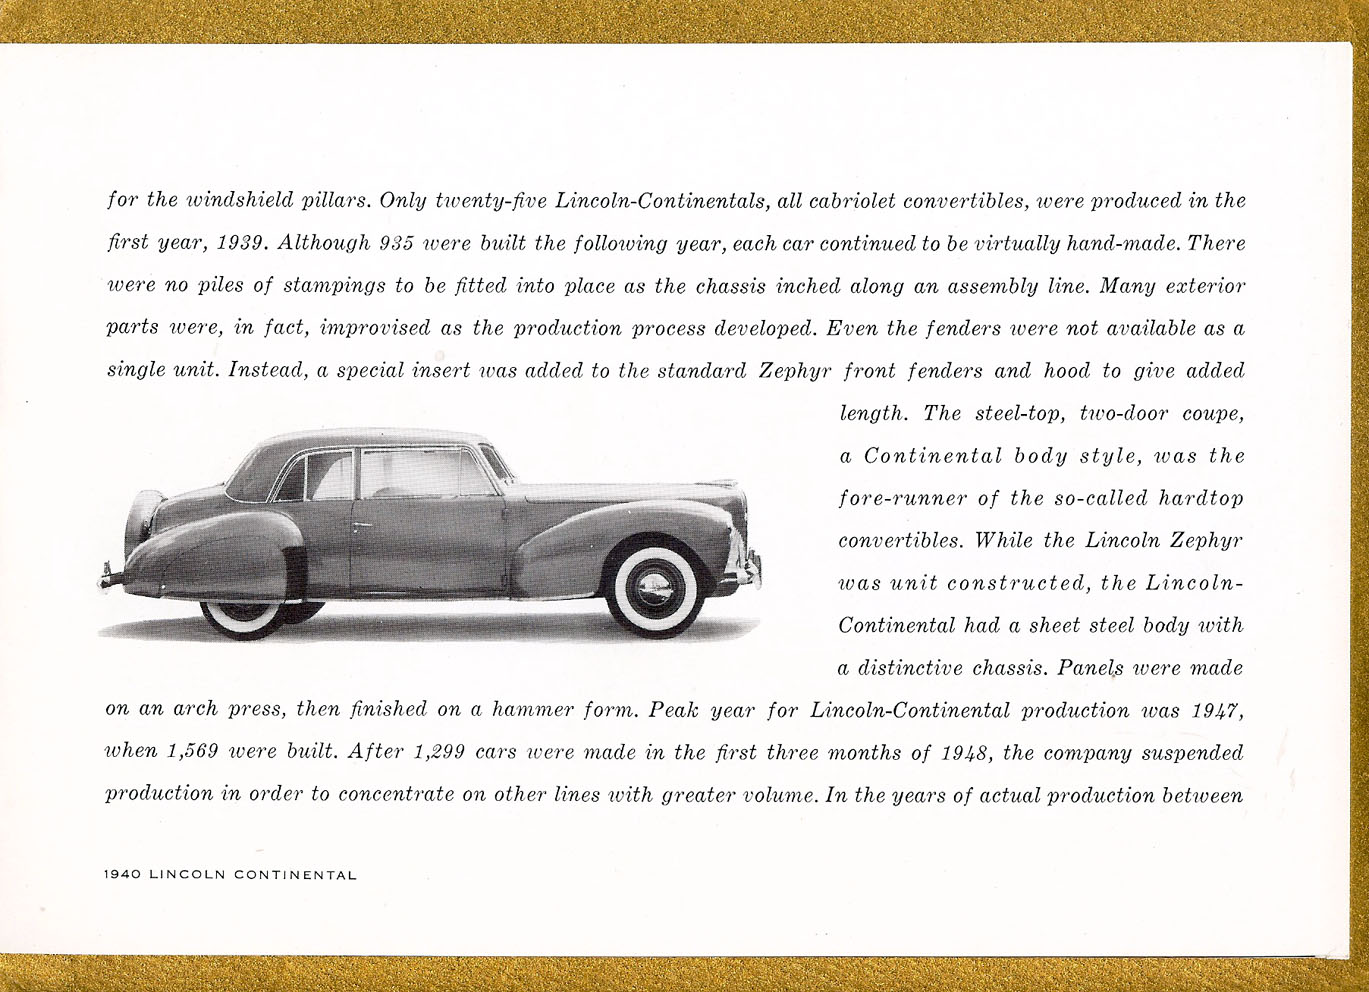 n_1955 Lincoln - The Continentals-06.jpg